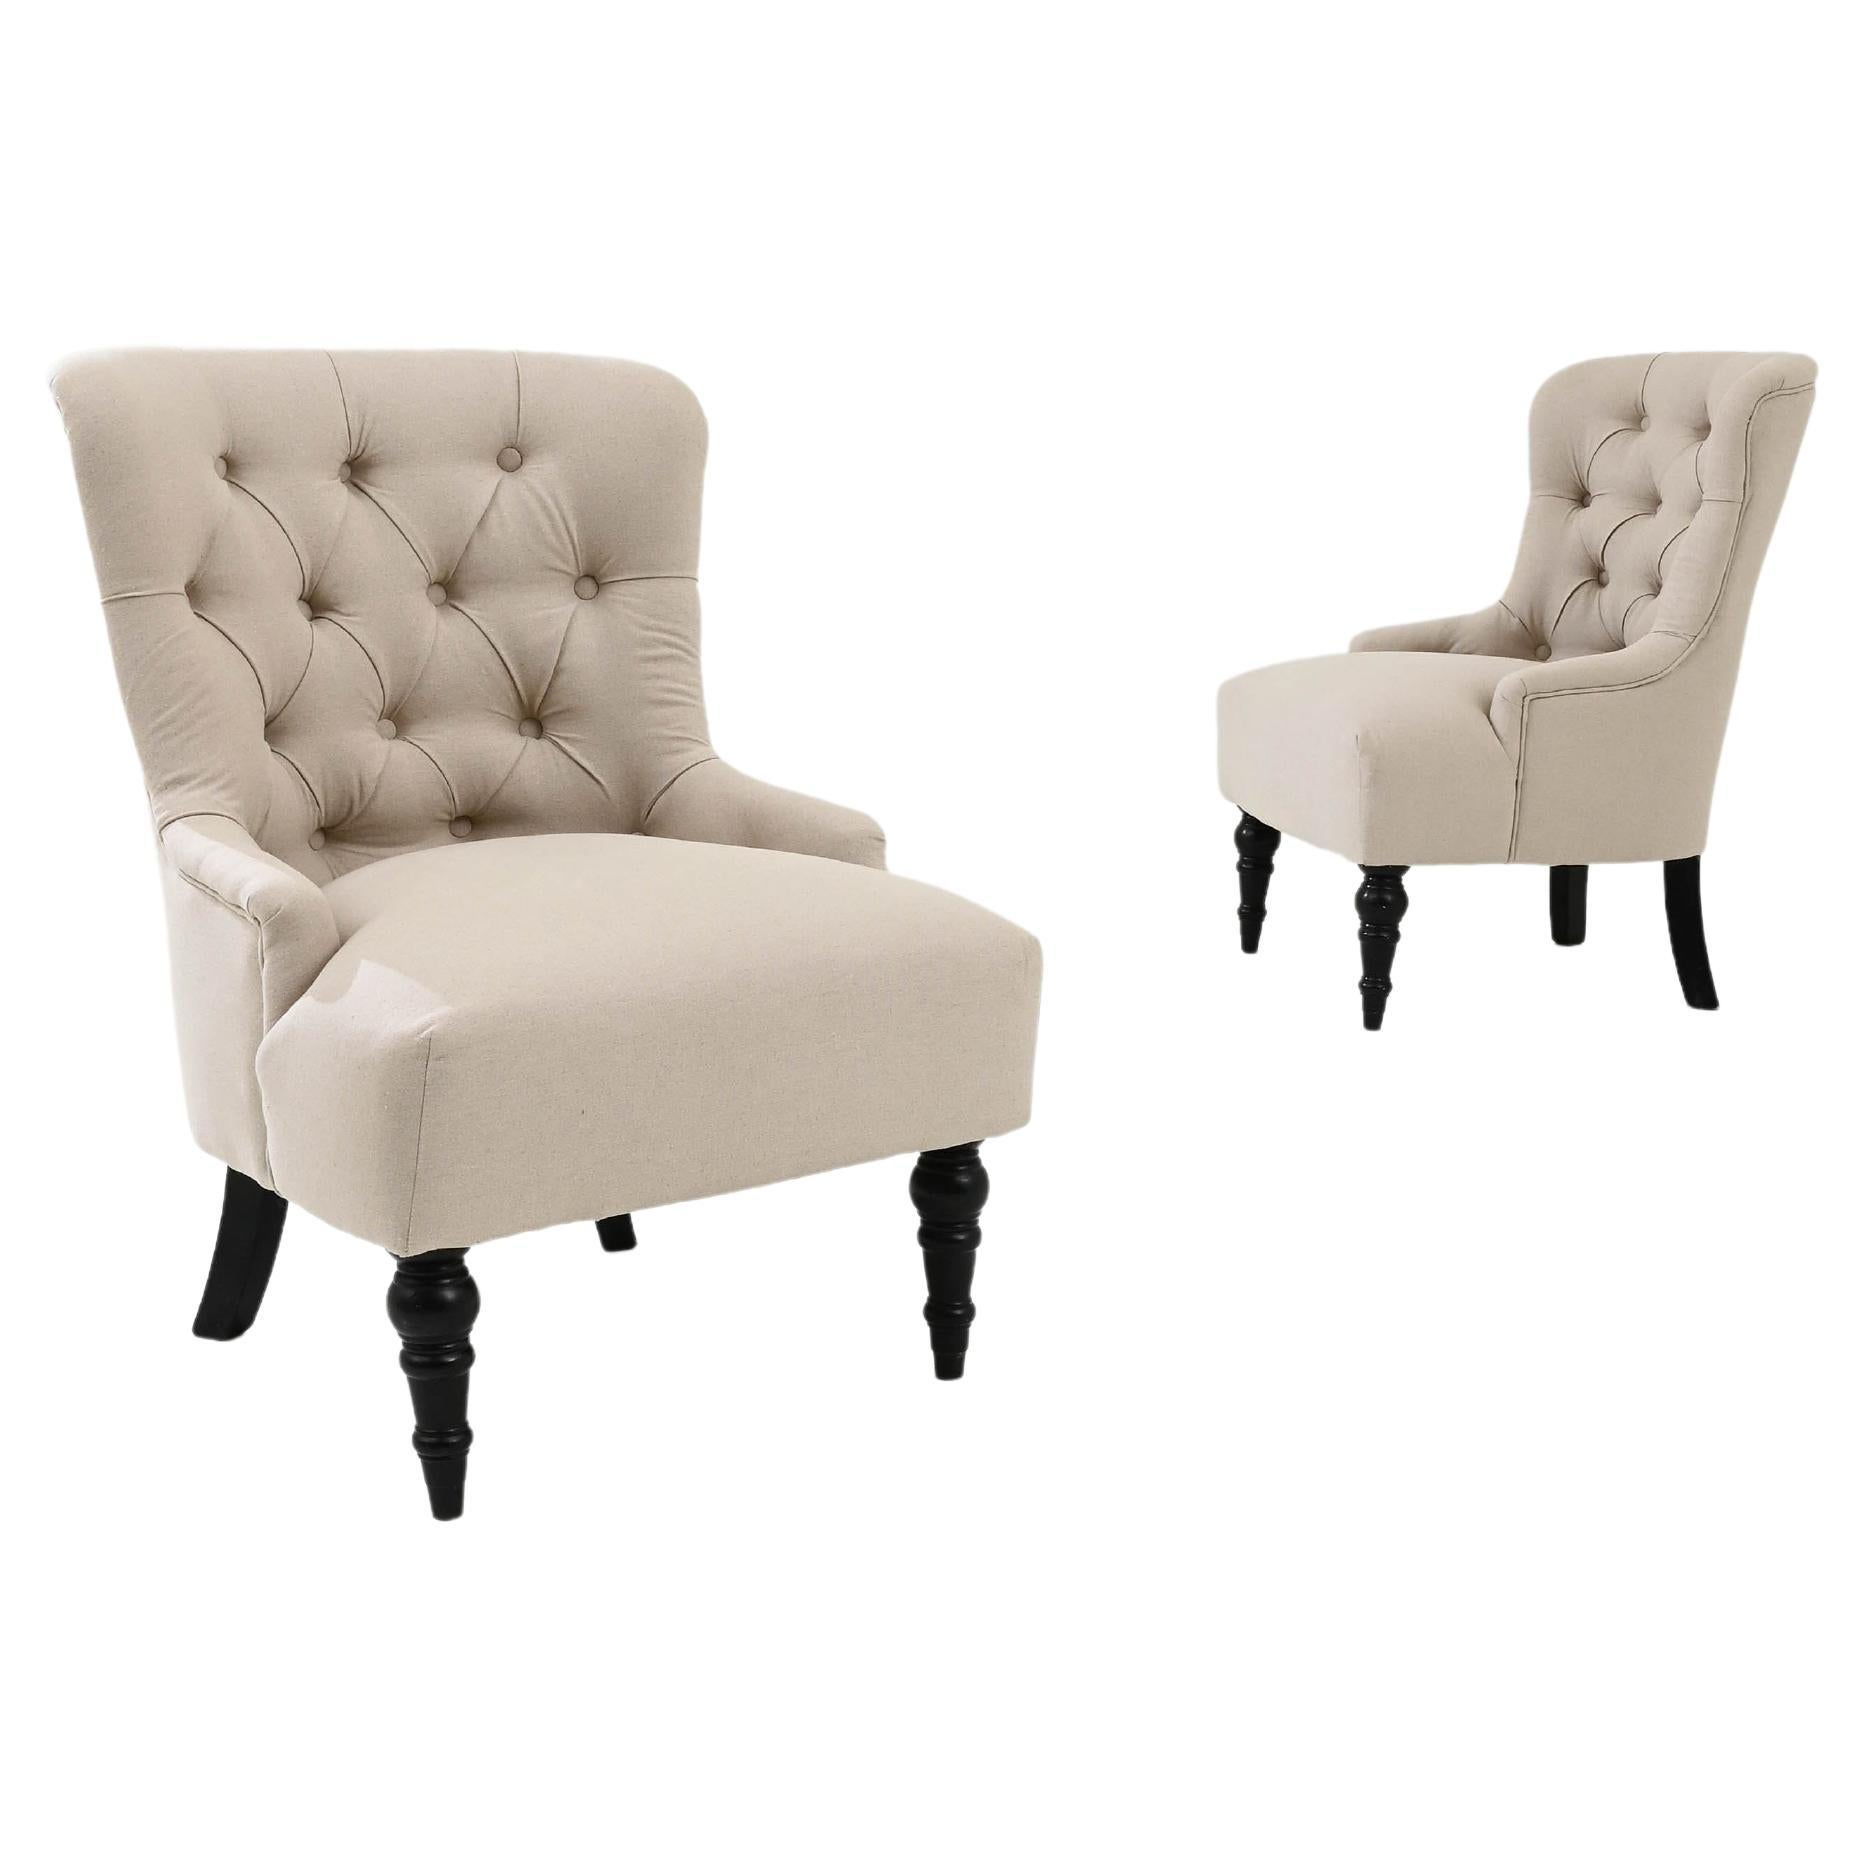 19th Century French Wooden Upholstered Armchairs